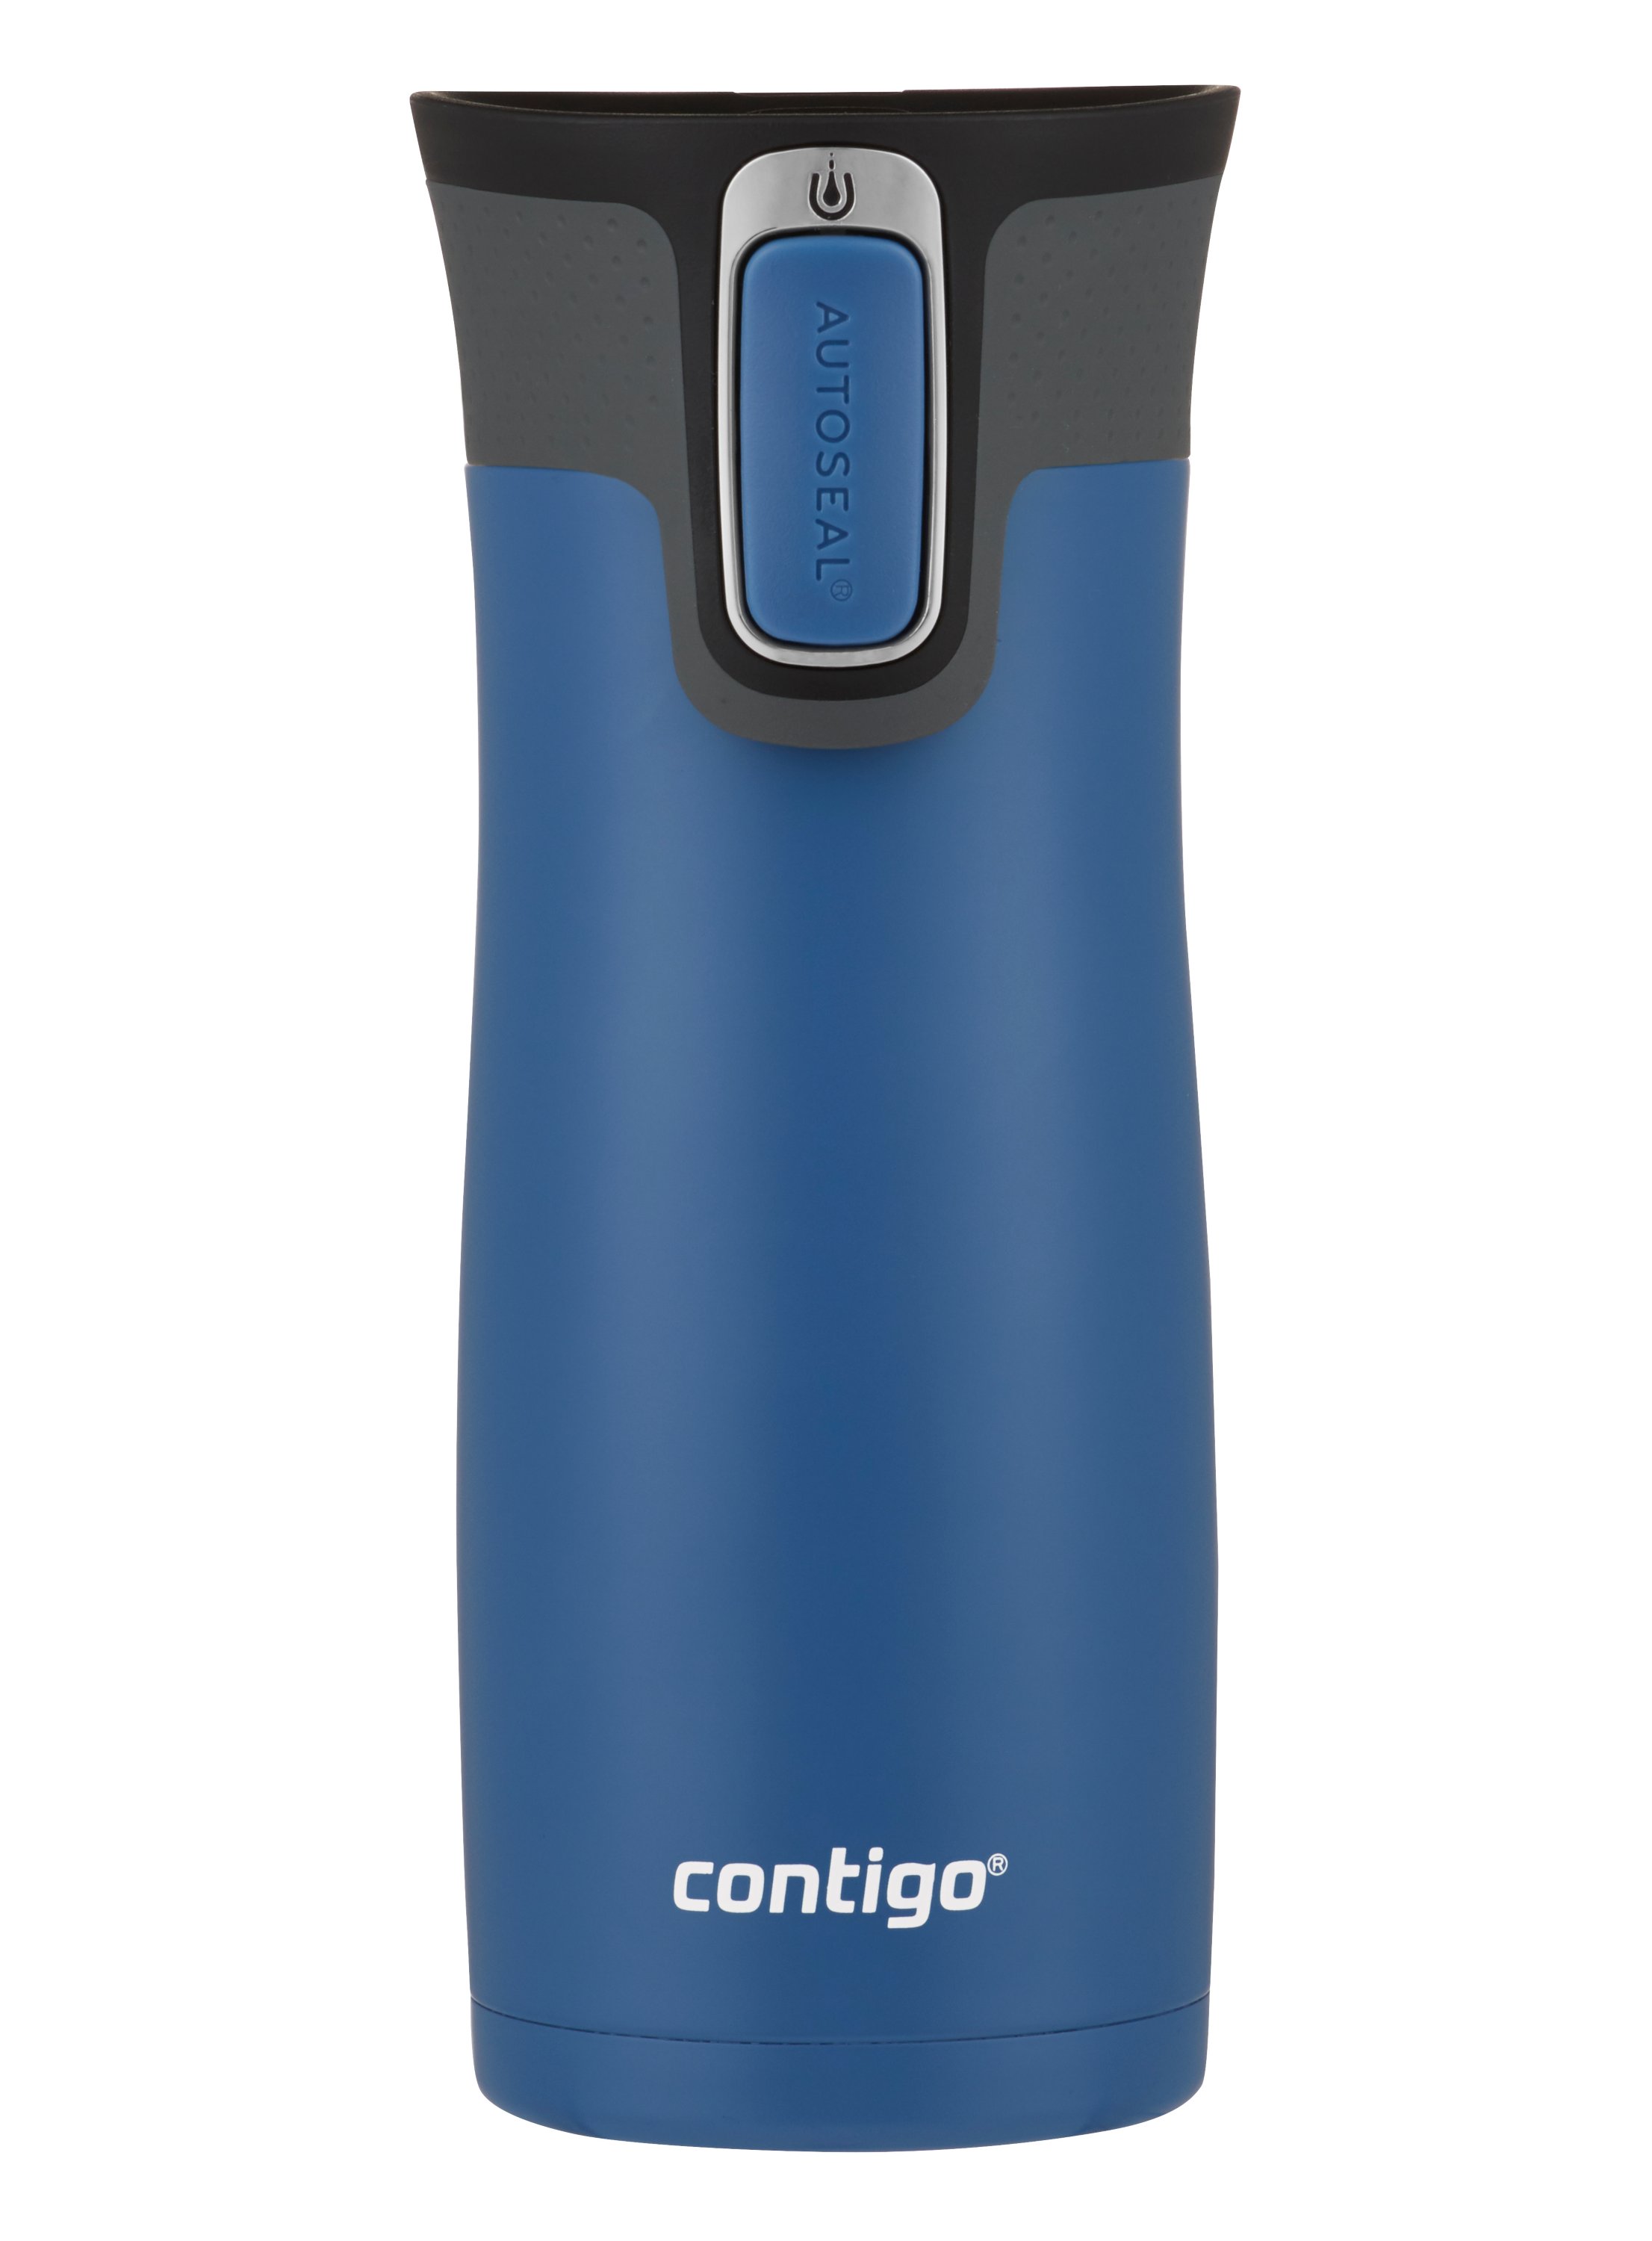 Contigo 16oz Autoseal West Loop Stainless Steel Travel Mug with Easy-Clean Lid, Blue Corn - image 1 of 2